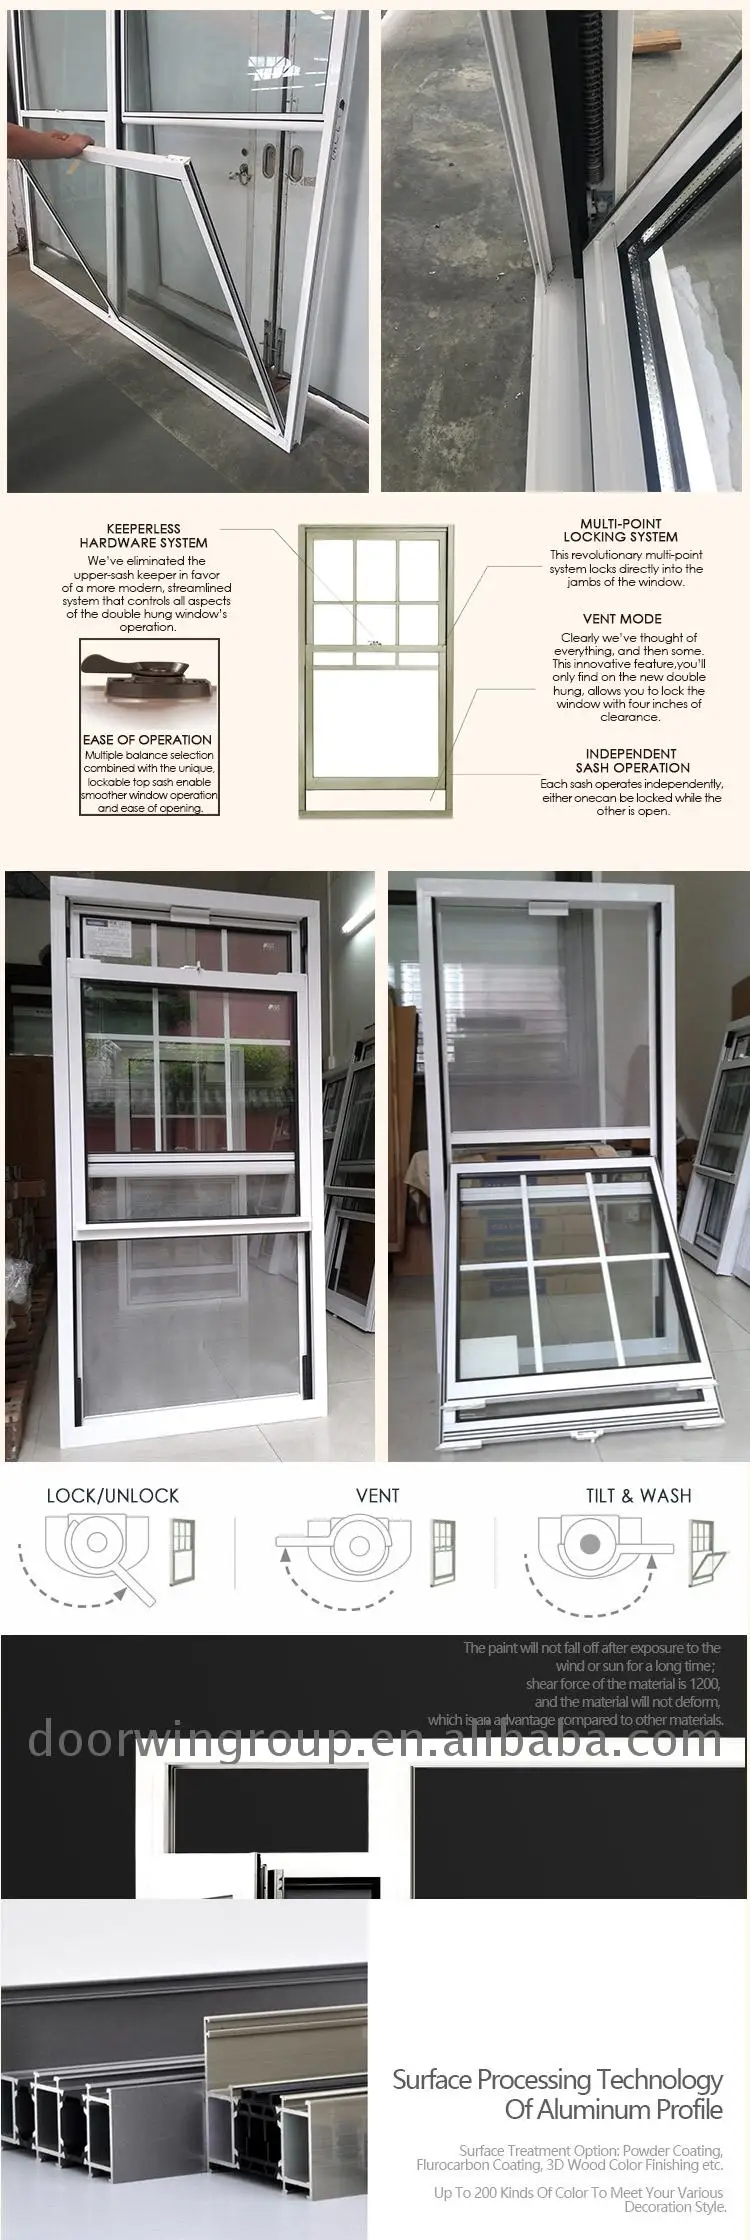 New York slide up windows aluminum 28x54 replacement dust-proof high quality single and double hung windows